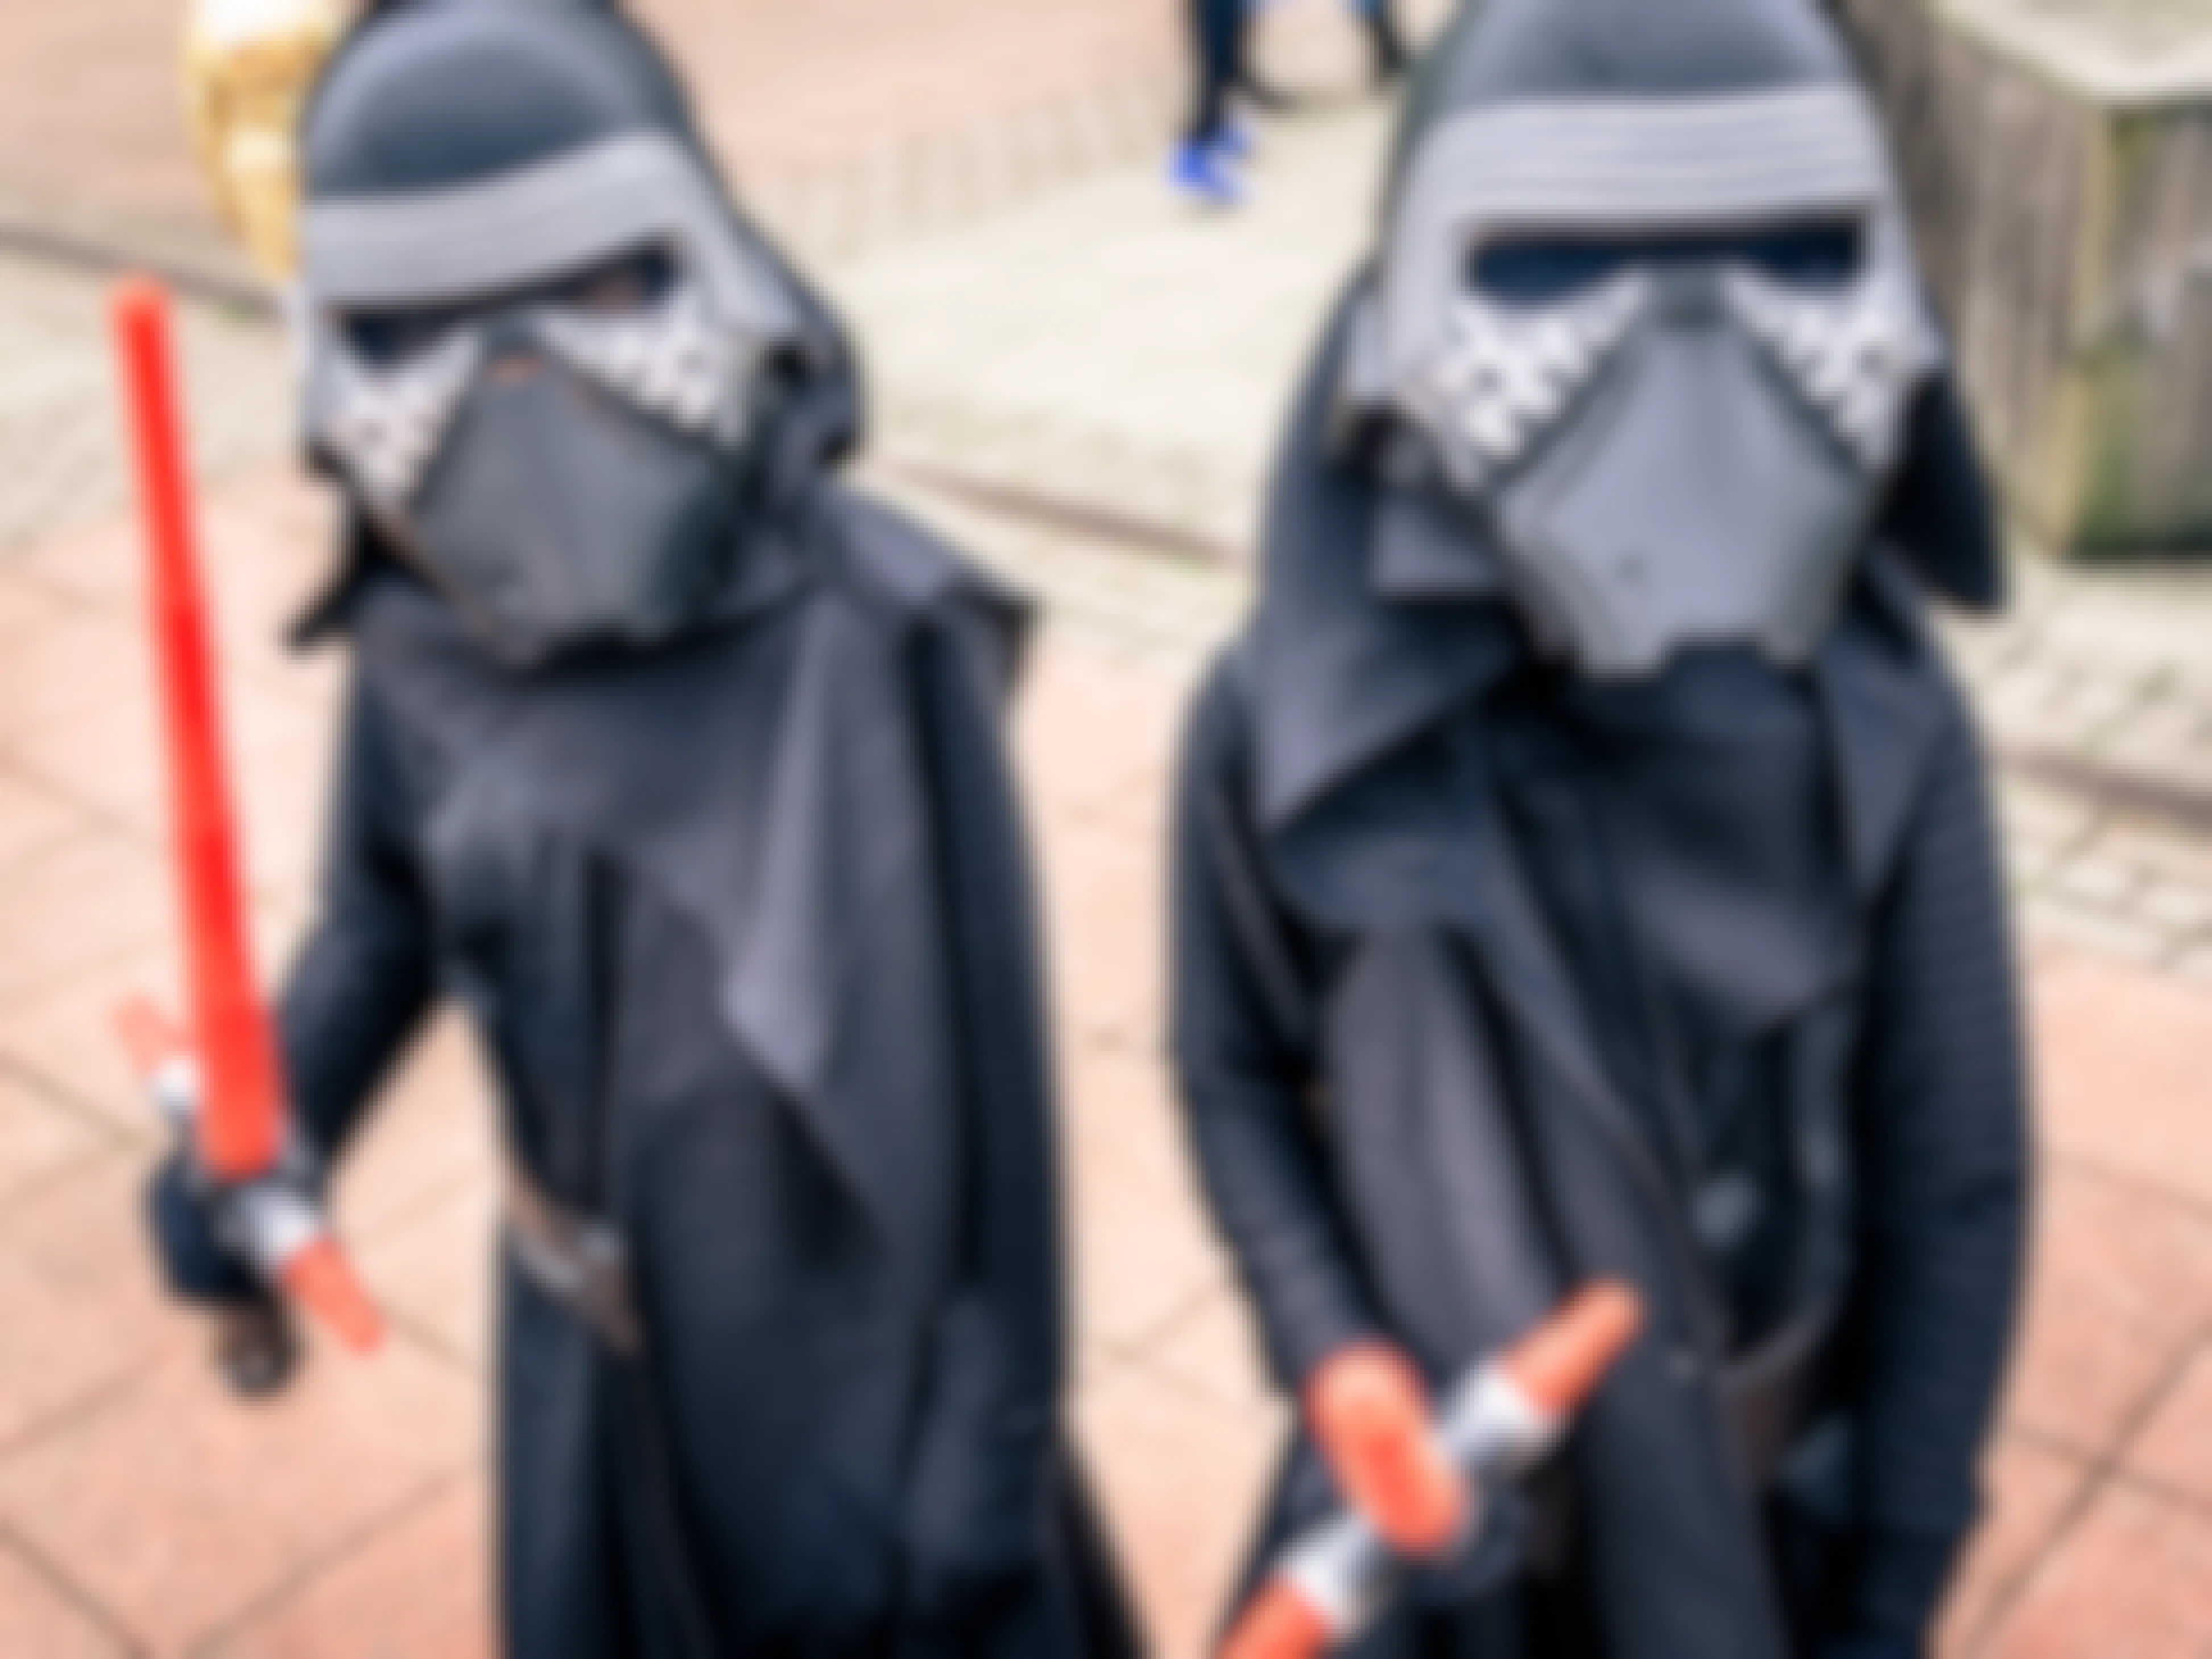 Two kids dressed up as Kylo Ren for Halloween